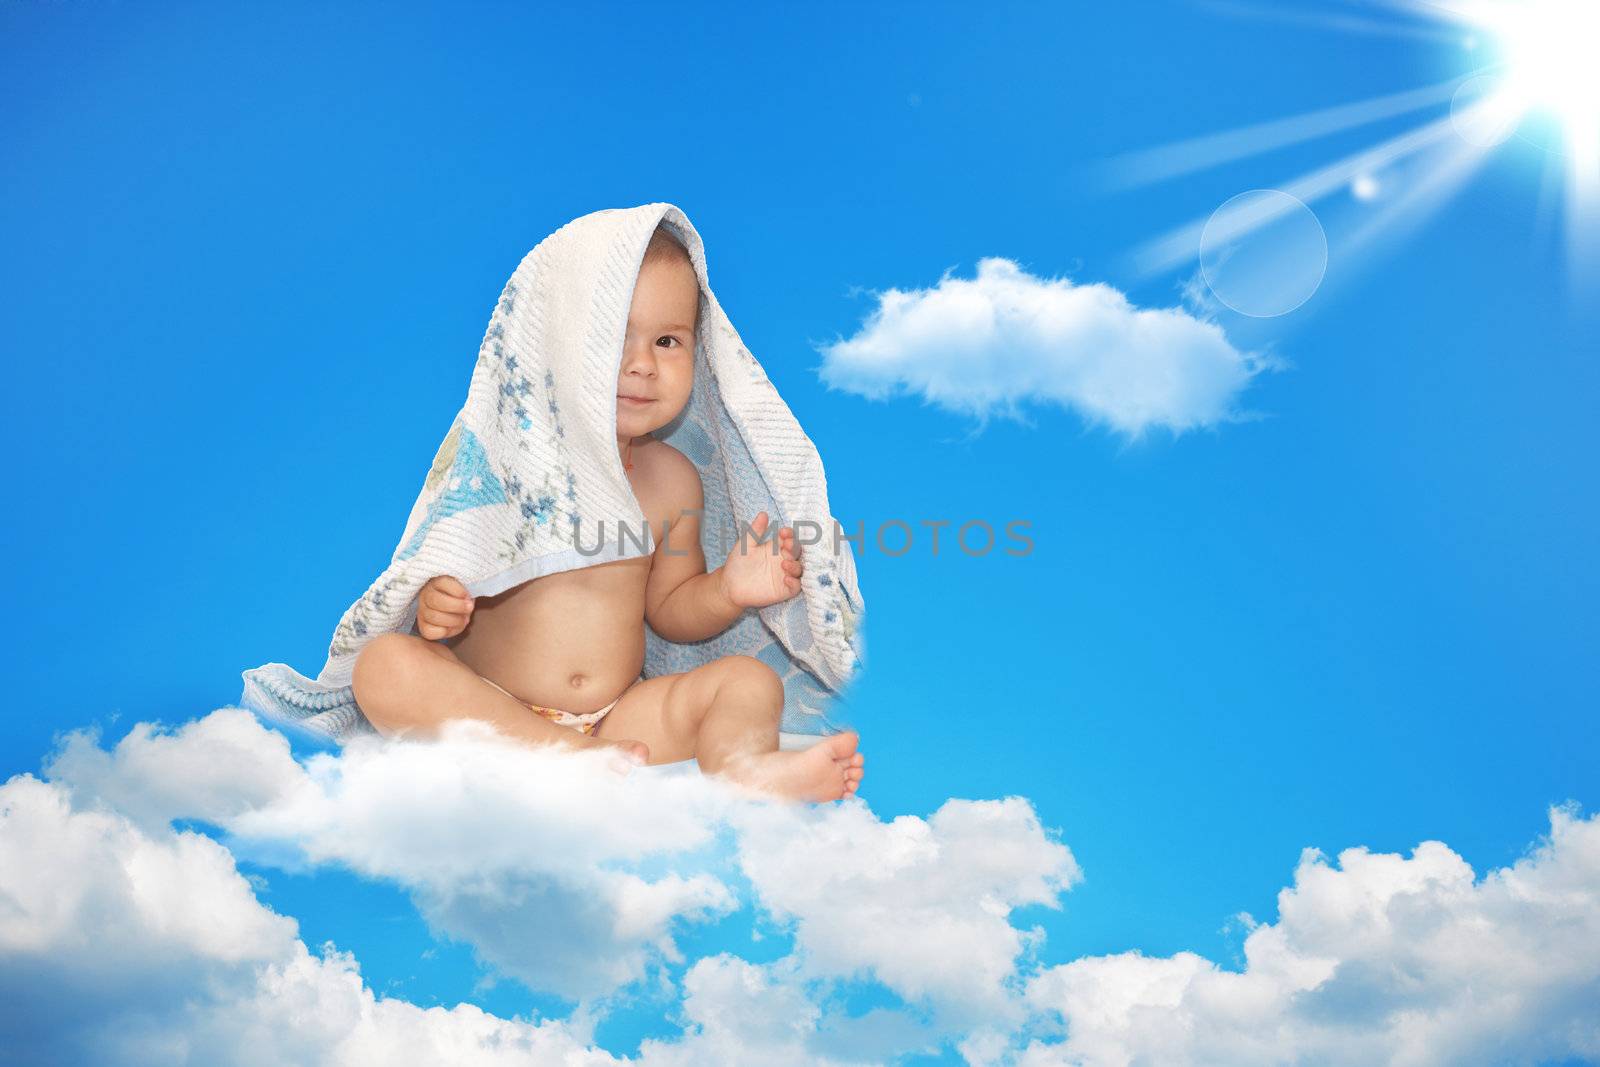 The small child sits on a white cloud in the sky